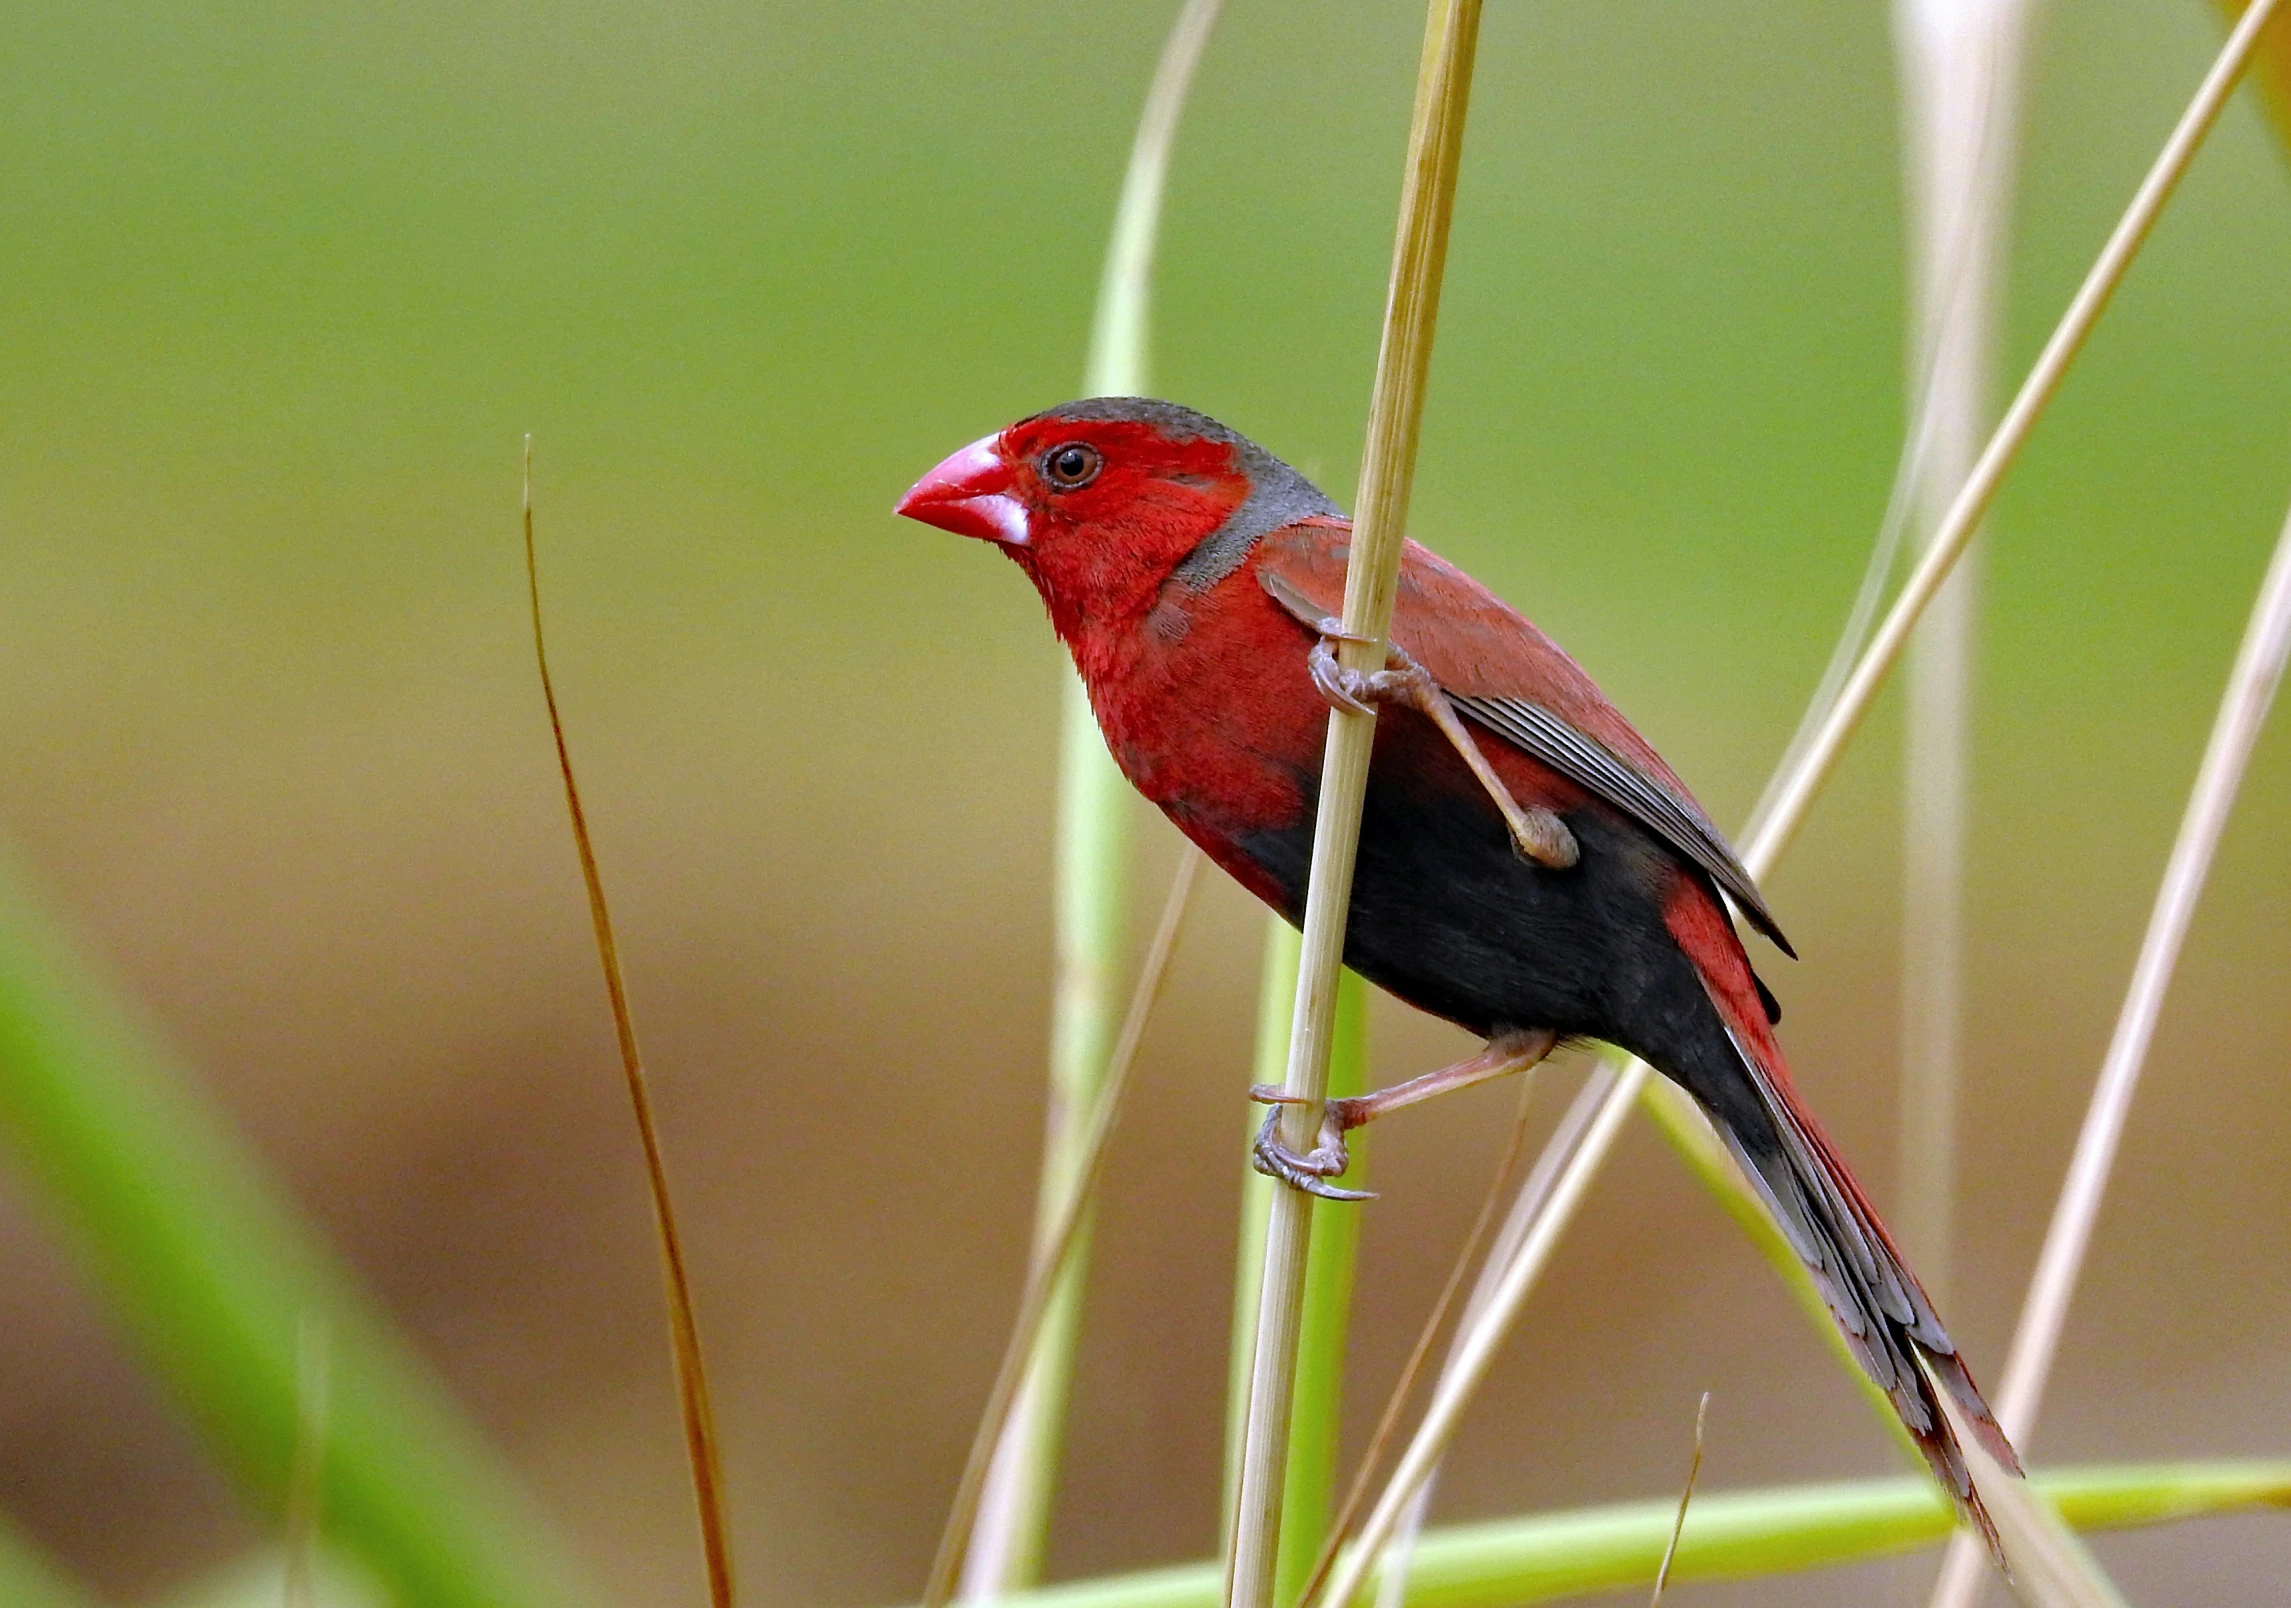 a small red bird with black wings sitting on a nch